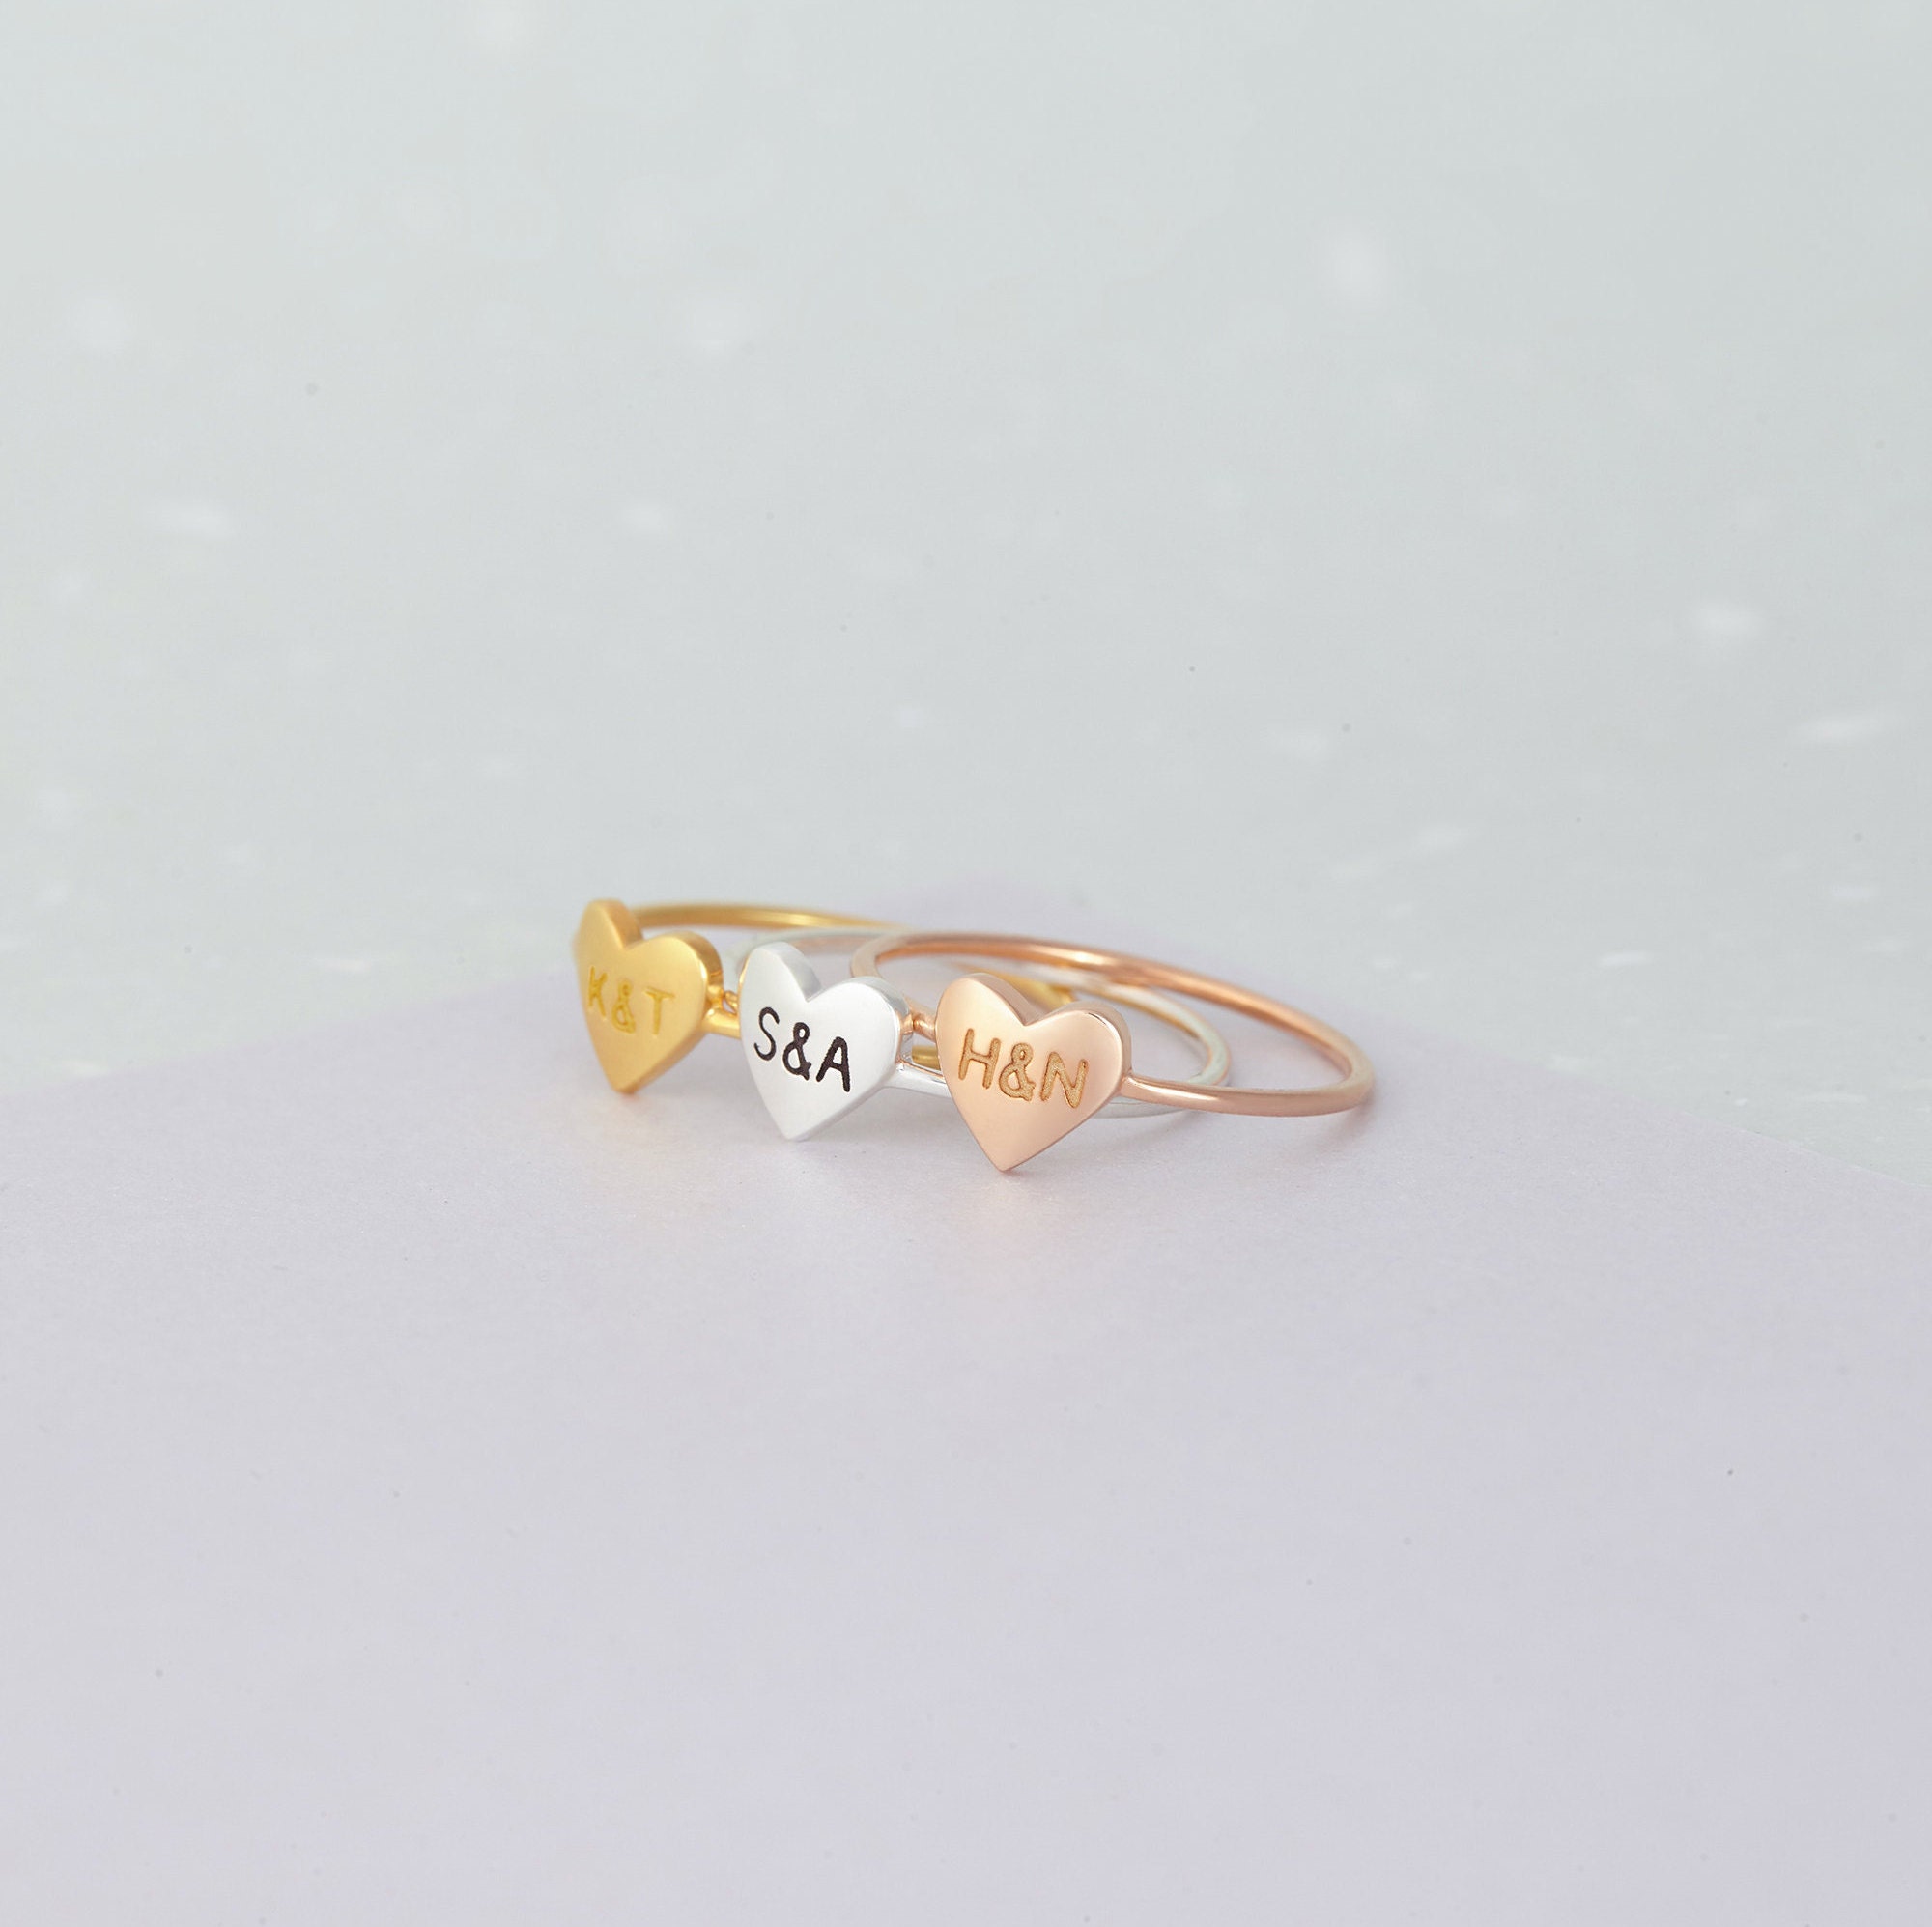 Two Character Duo Rings- One Letter Set in Diamonds | hiba-jaber